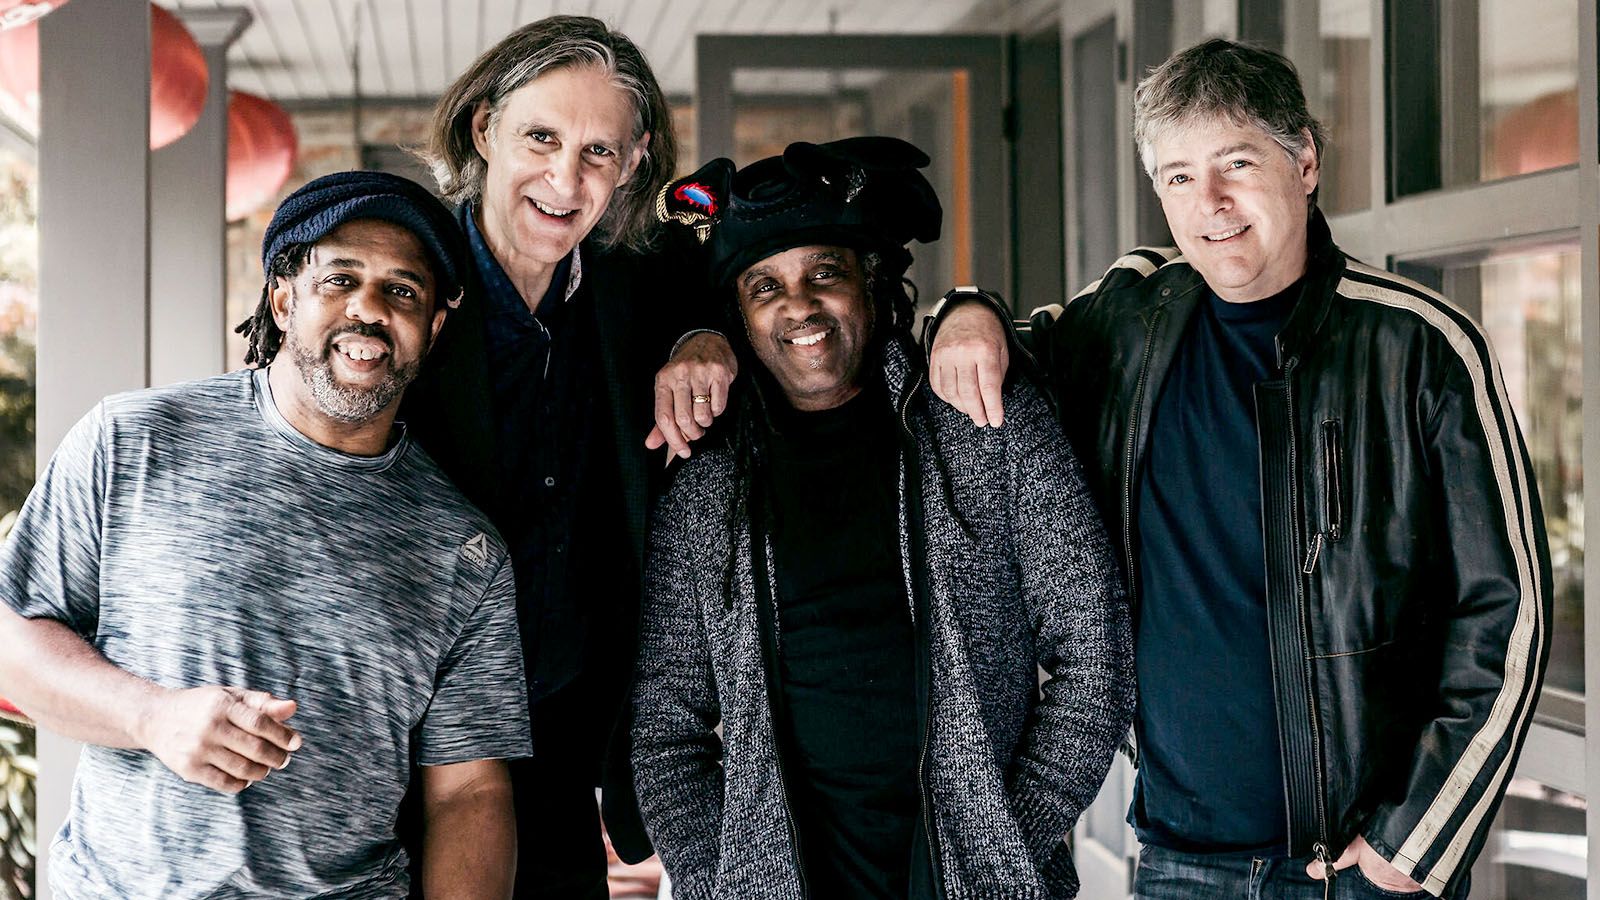 The original lineup of Béla Fleck & The Flecktones will be at The Clyde Theatre on June 10.